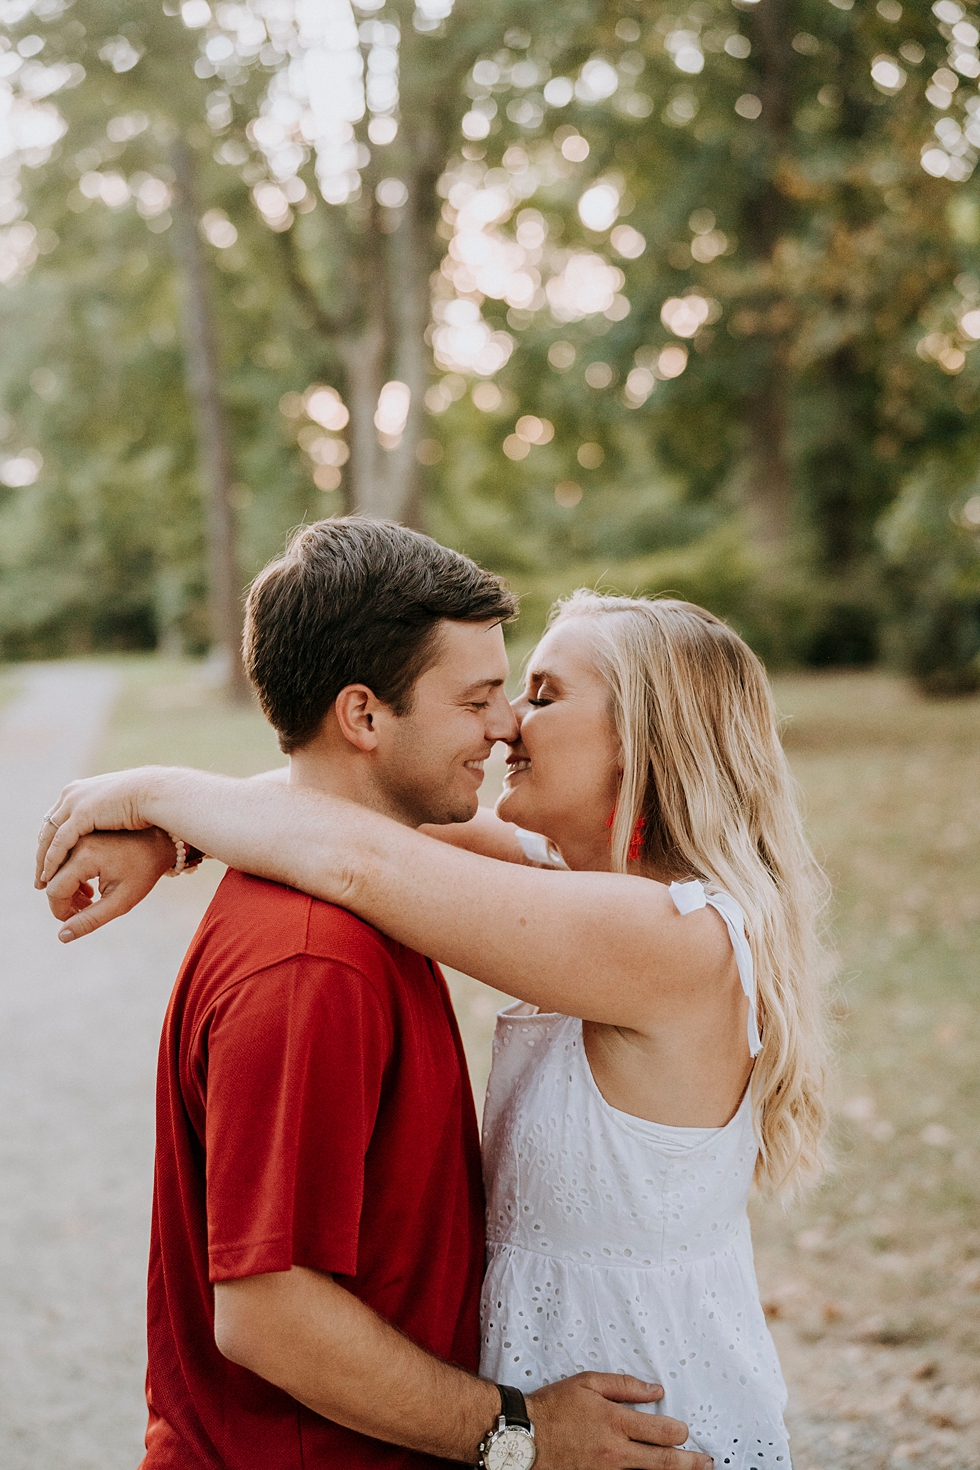  Engaged couple shares kiss on the forest in casual attire #engagementphotographer #bernheimforest #engagementgoals #kentuckyengagementphotographer #kentuckyphotographer #engagementsession #photographyanddesignbylauren 